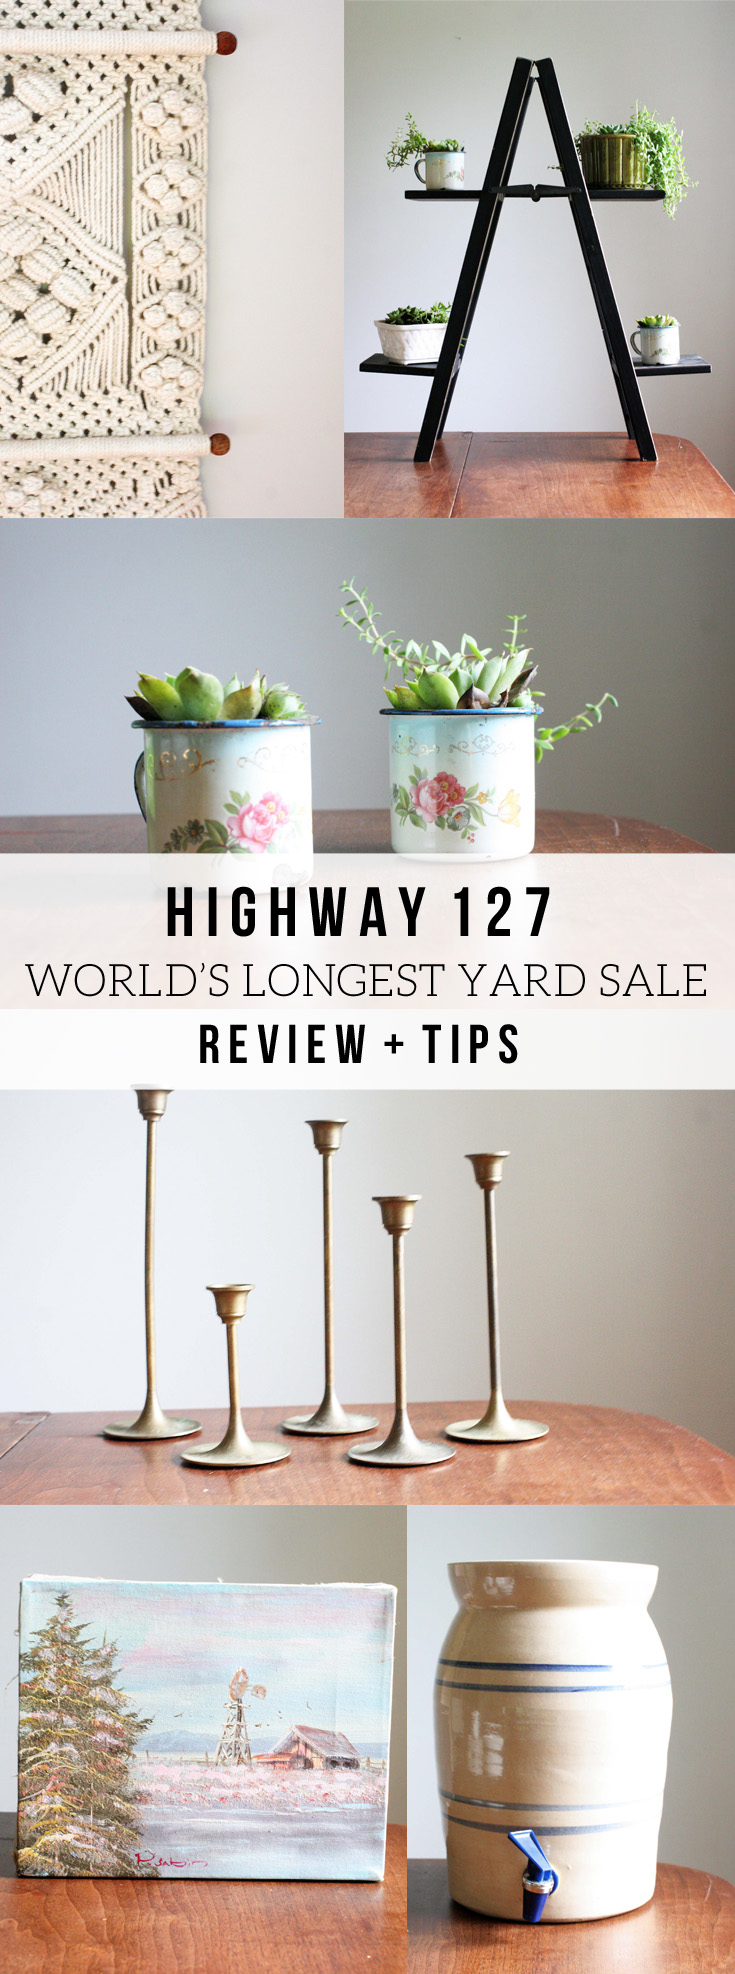 Tips for the HWY 127 Yard Sale. A review of the World's Longest Yard Sale. Favorite finds on the HWY 127 Corridor Sale. by @CraftivityD 